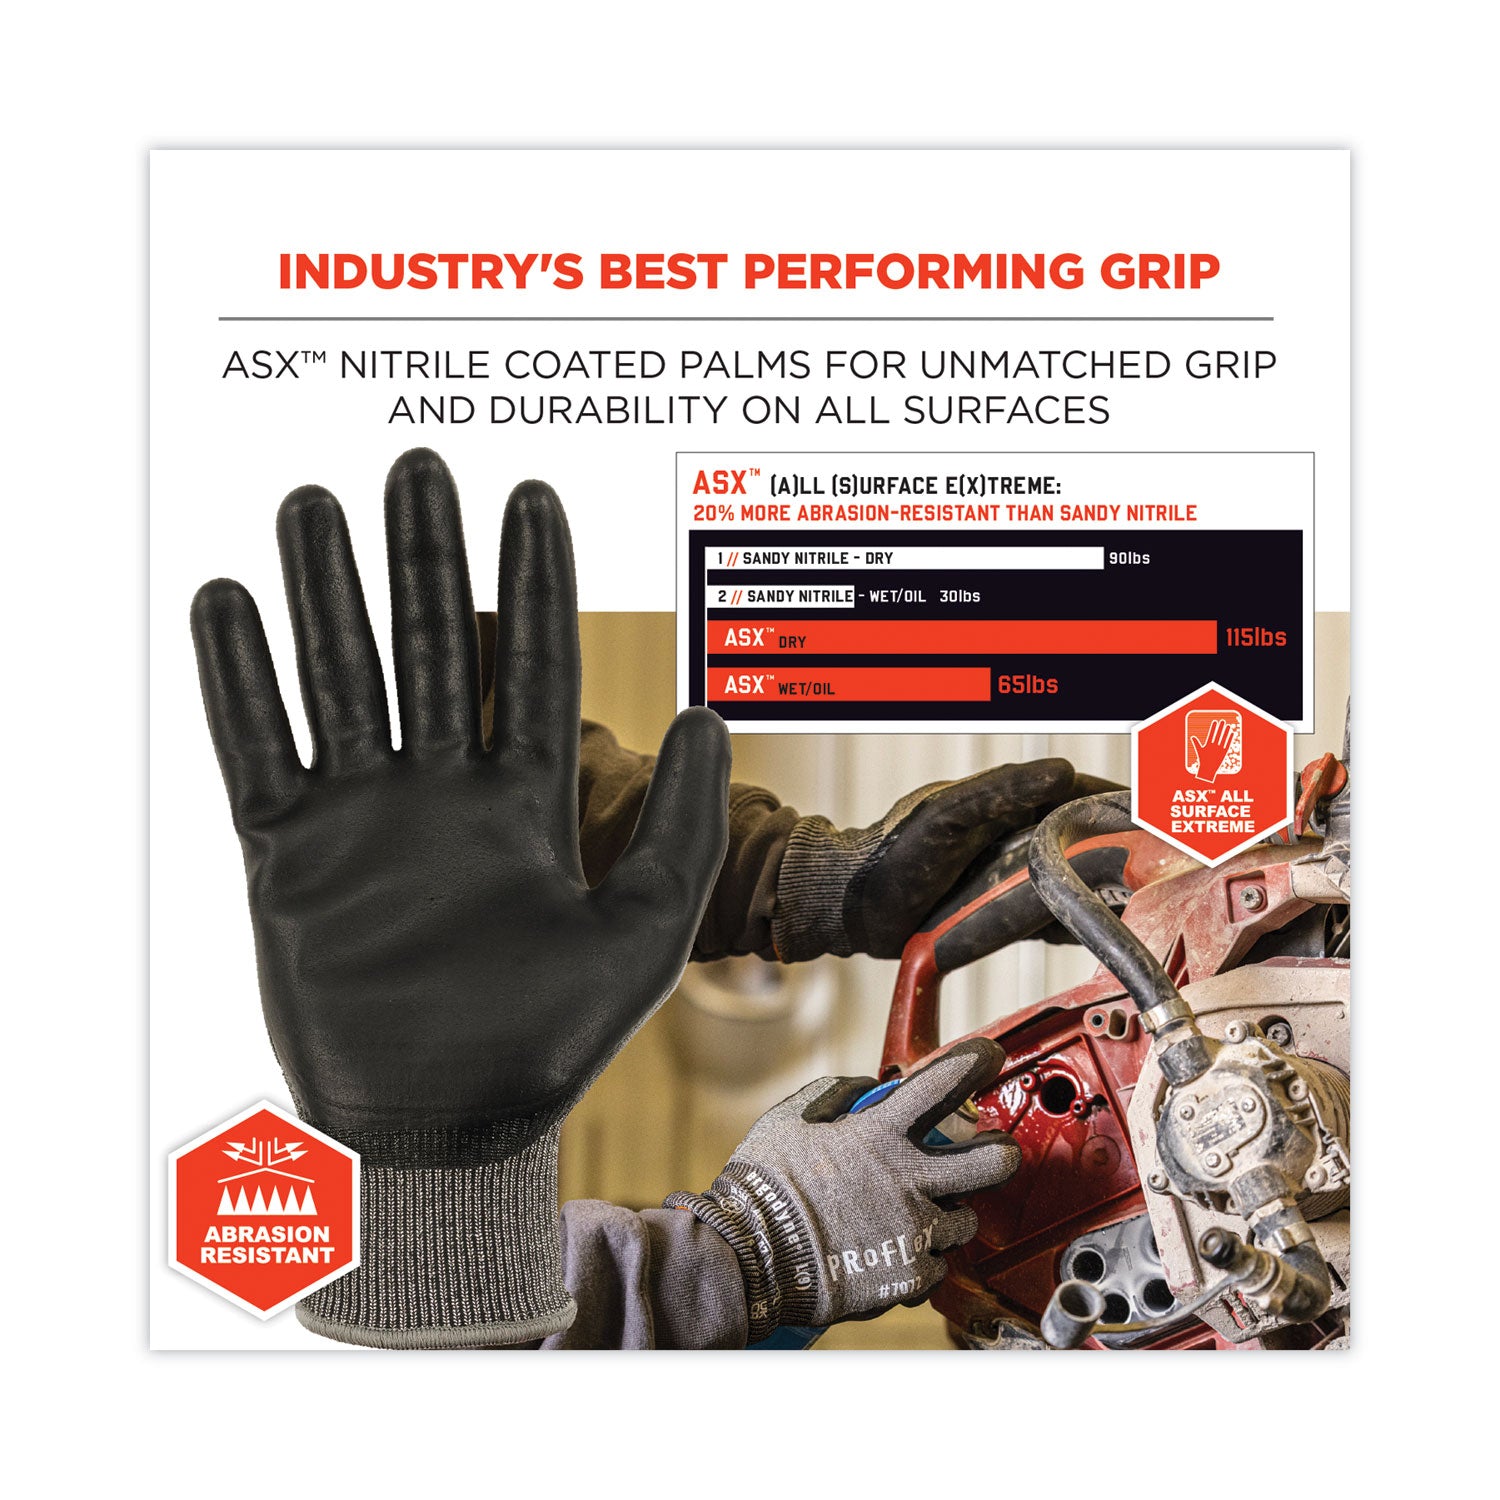 proflex-7072-ansi-a7-nitrile-coated-cr-gloves-gray-x-large-pair-ships-in-1-3-business-days_ego10315 - 4